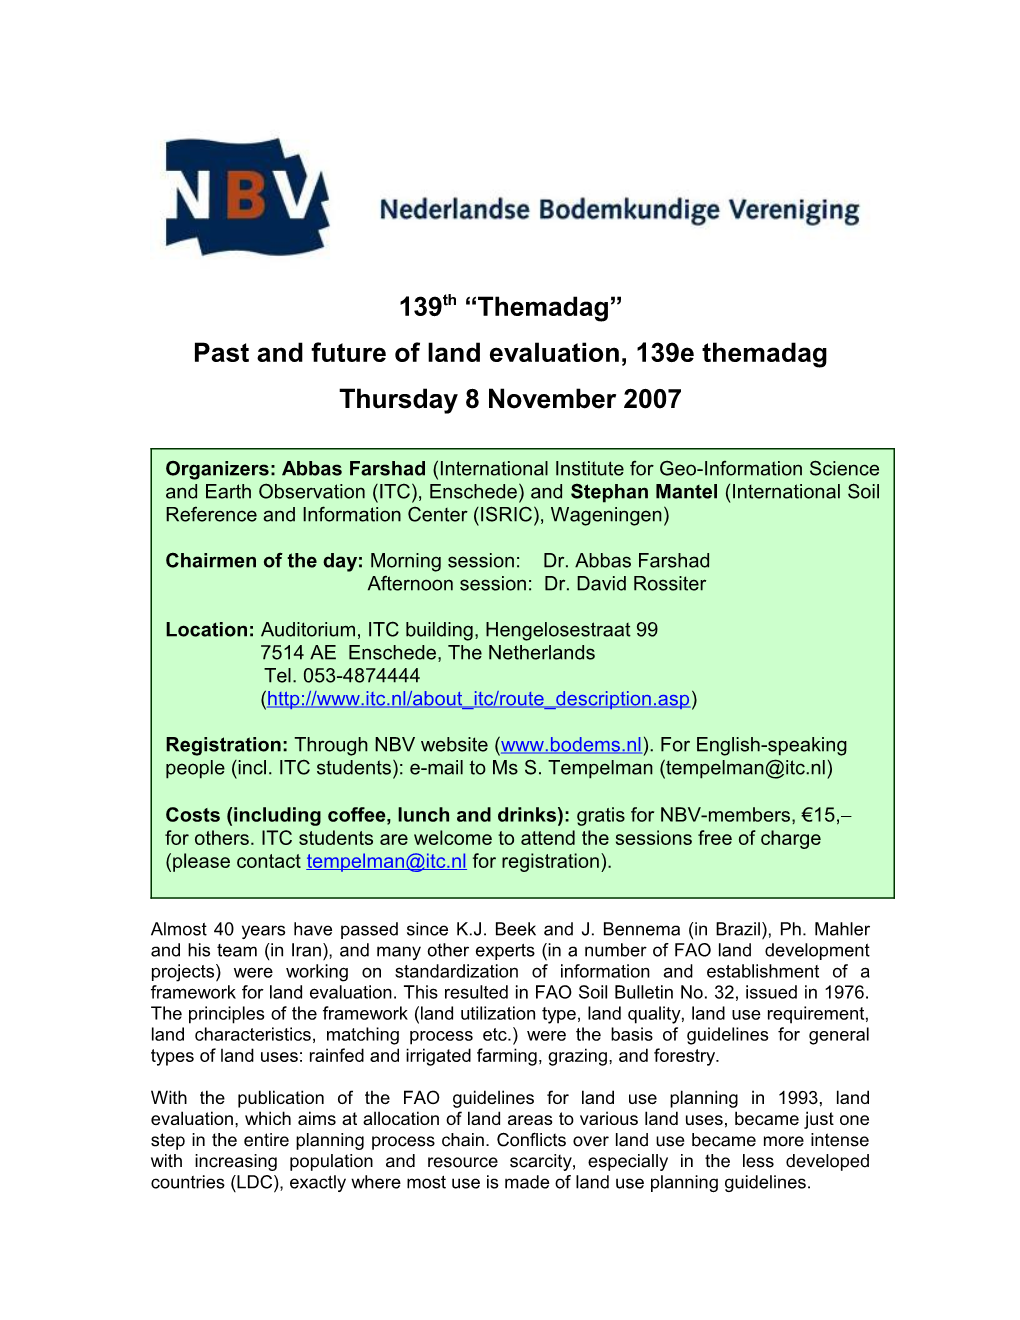 Past and Future of Land Evaluation, 139E Themadag